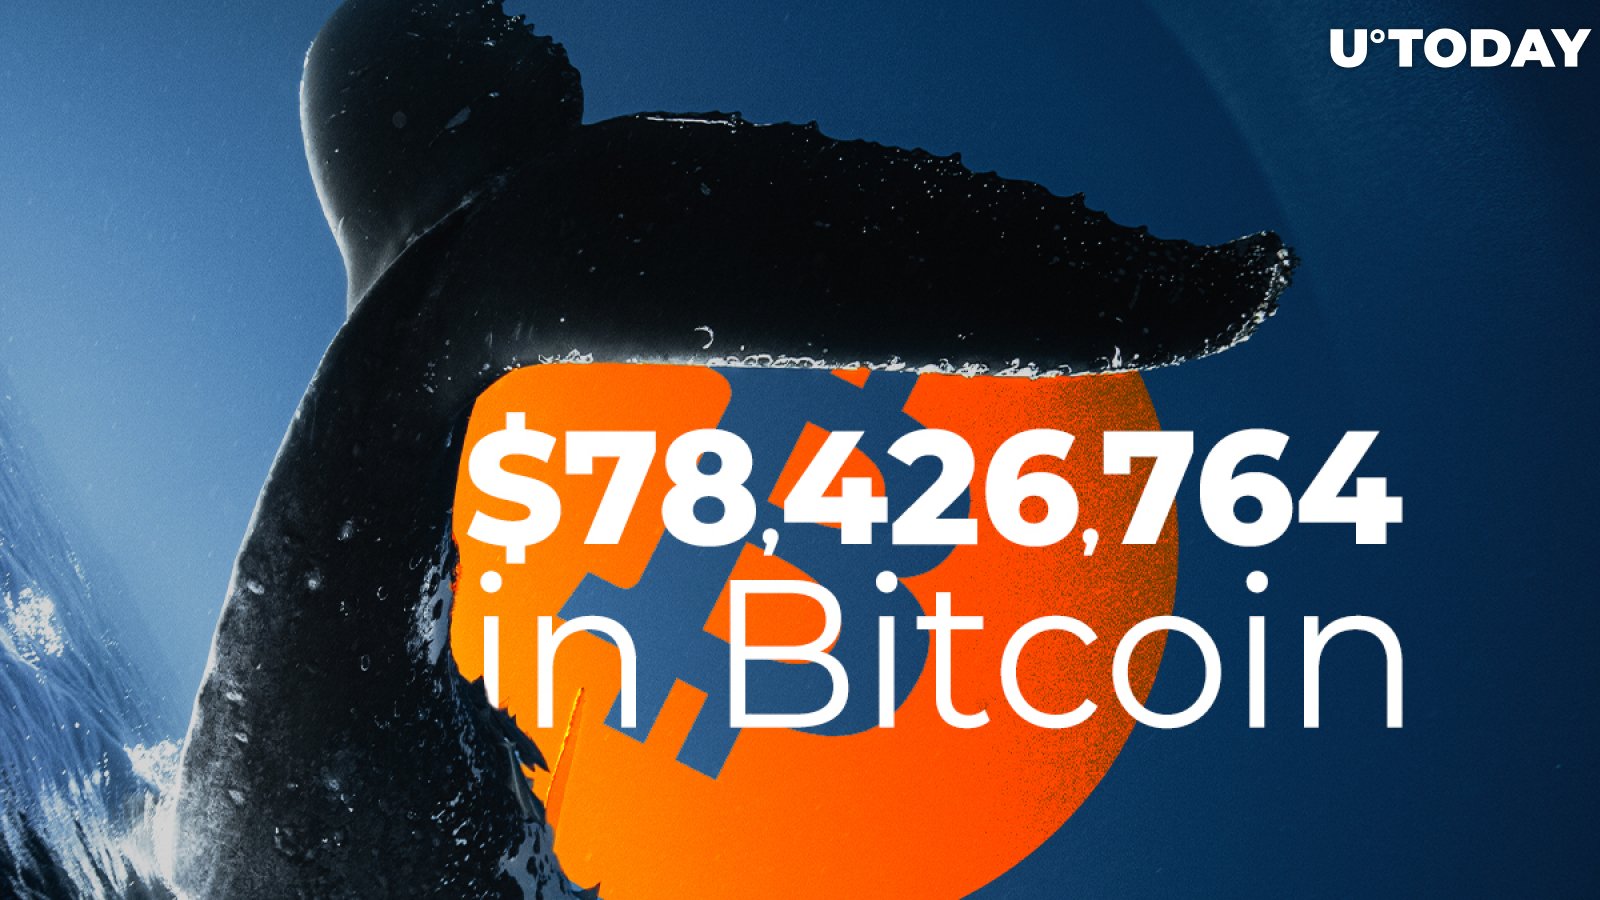 Whales and Binance Move $78,426,764 in Bitcoin While BTC Mean Transfer Volume Hits New Major High